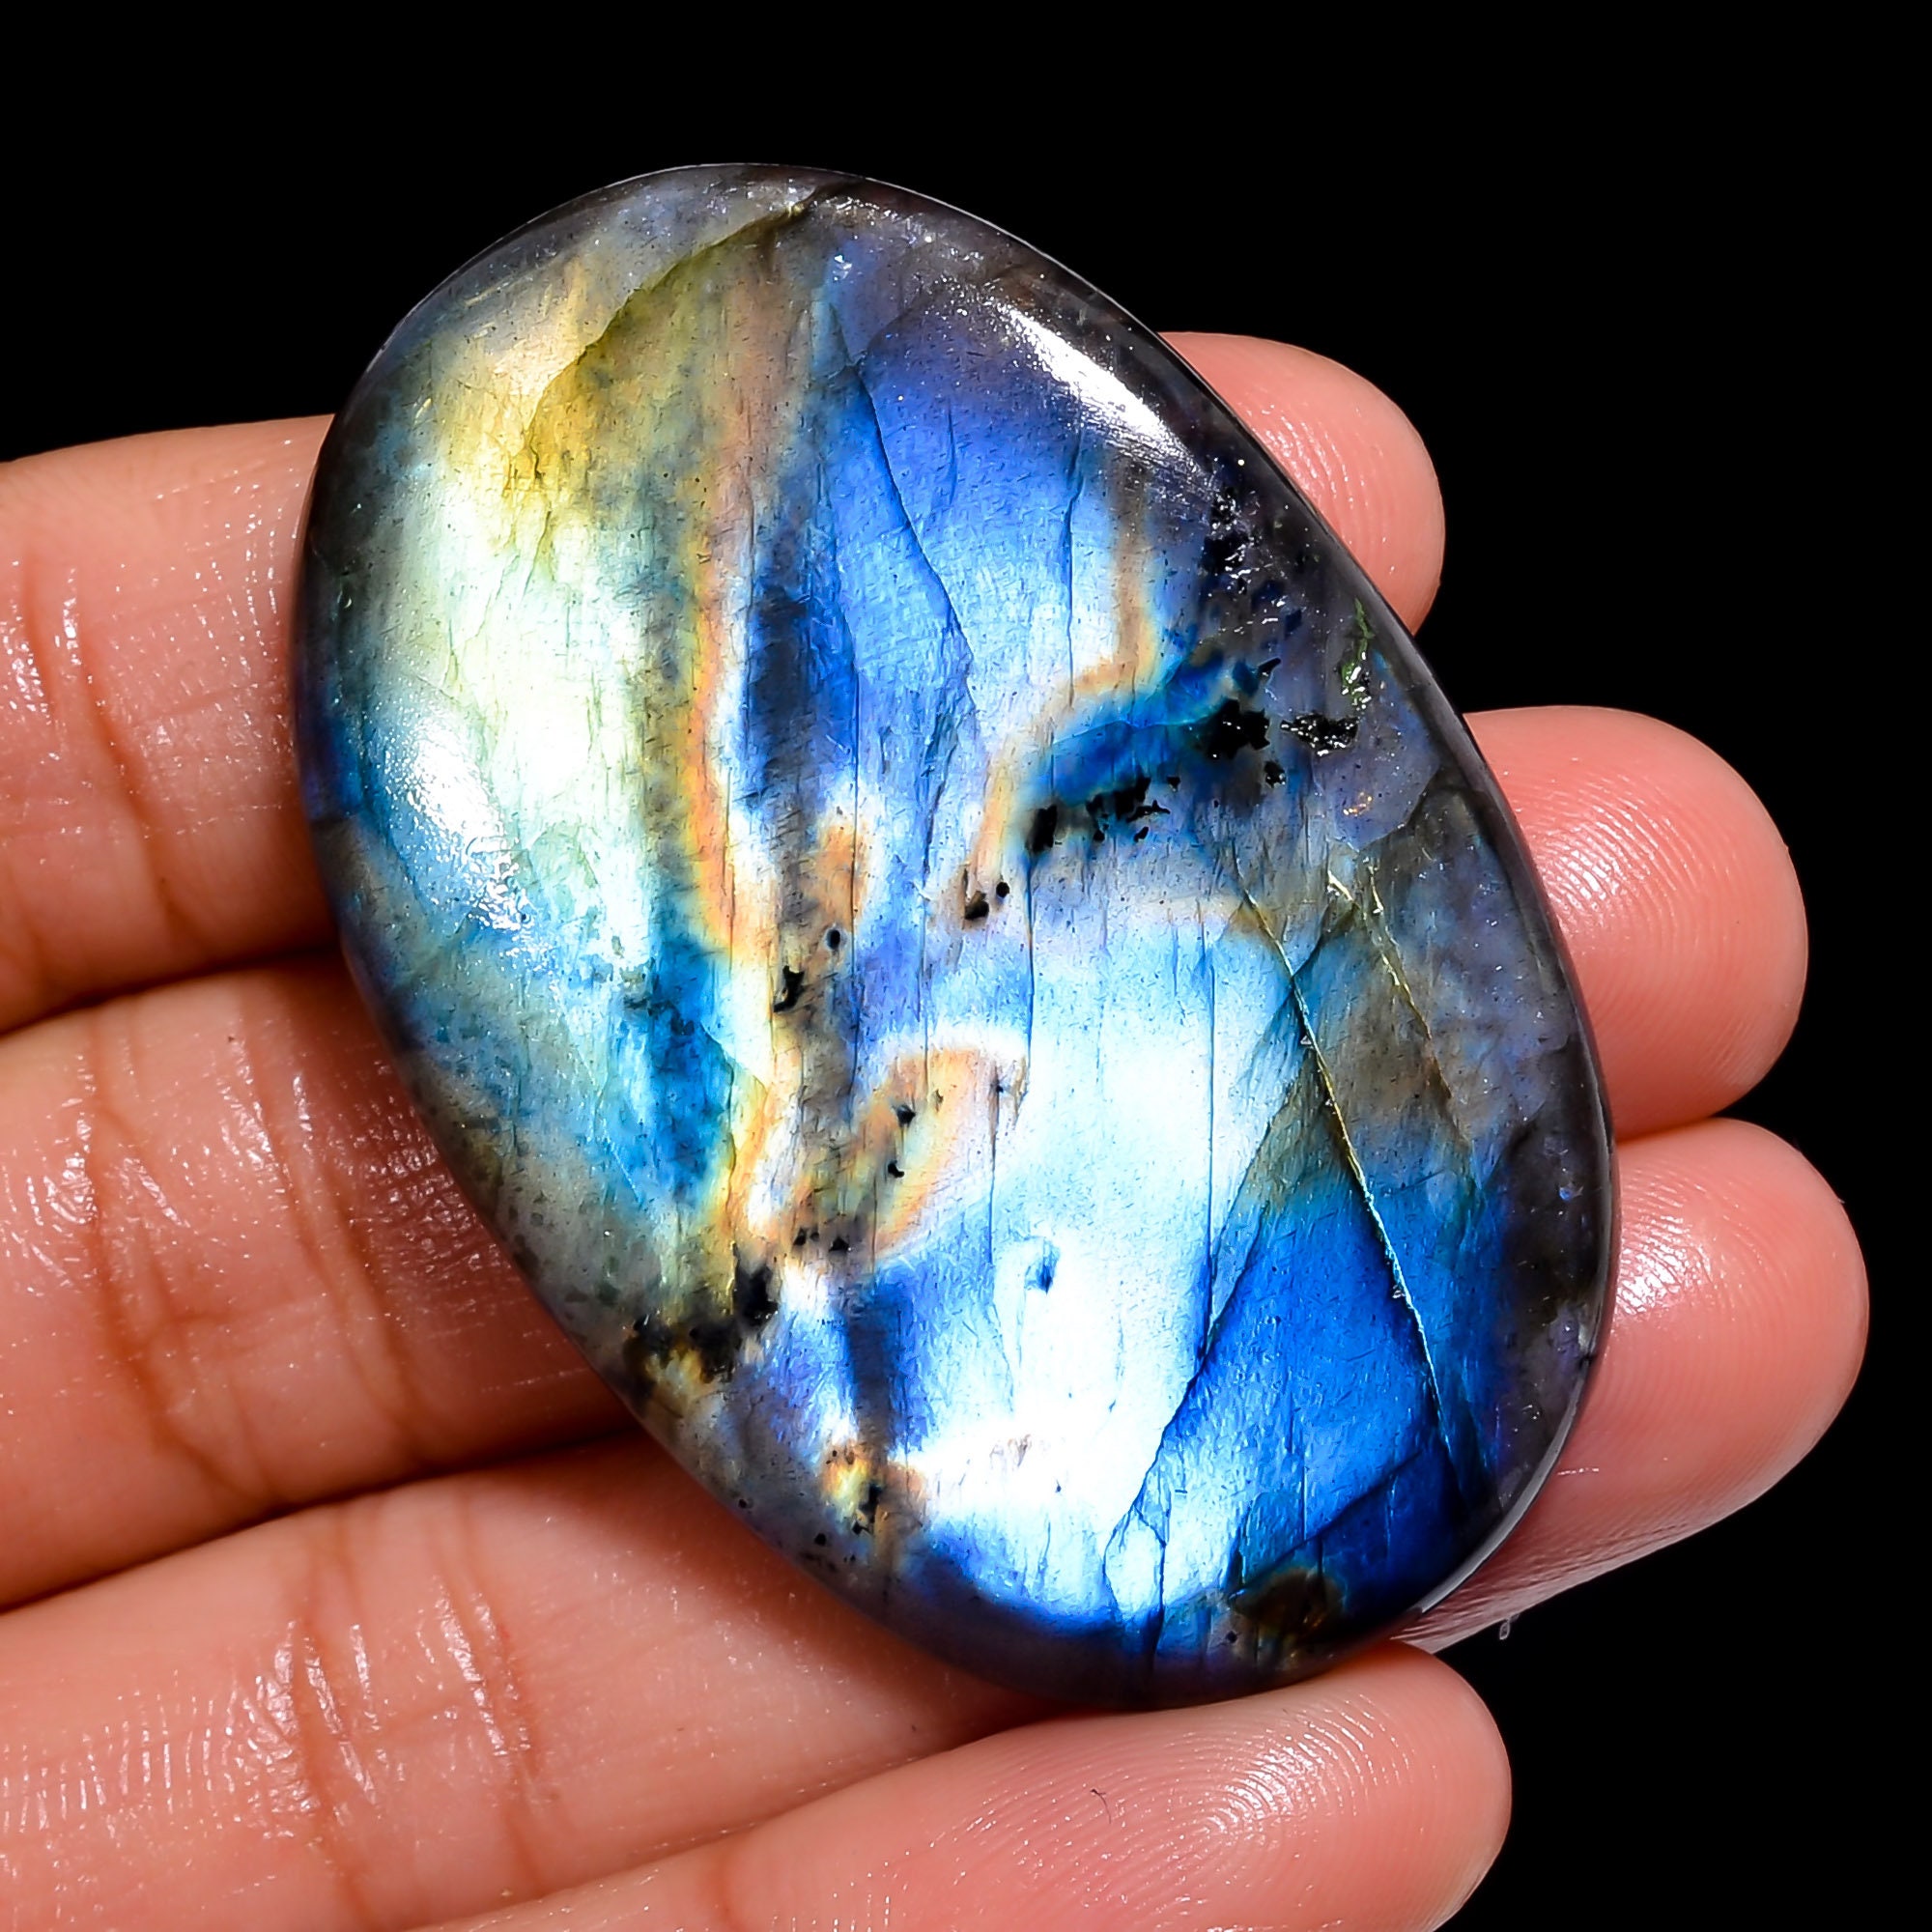 Beautiful Top Grade Quality 100% Natural Labradorite Oval Shape Cabochon Loose Gemstone For Making Jewelry 90 Ct 48X32X7 mm TG-909